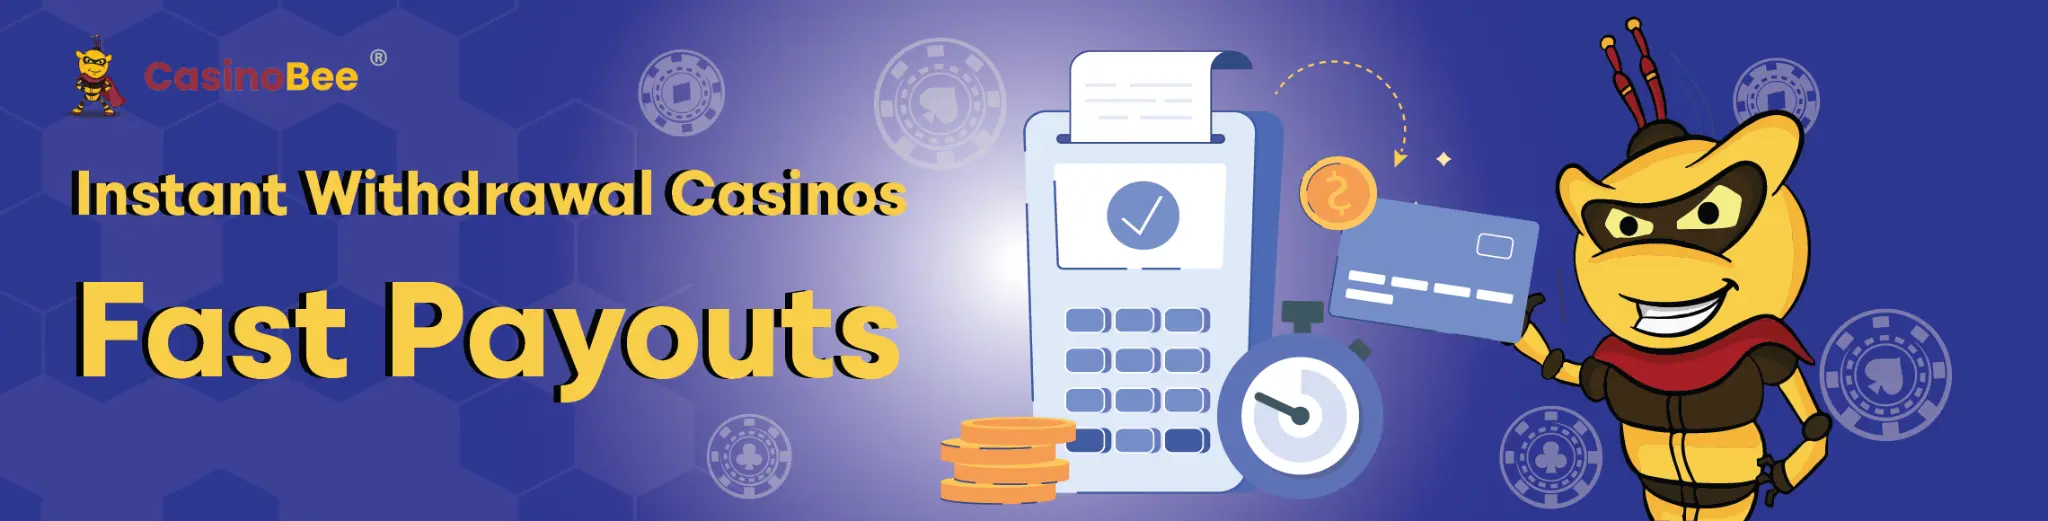 instant withdrawal casinos fast payouts